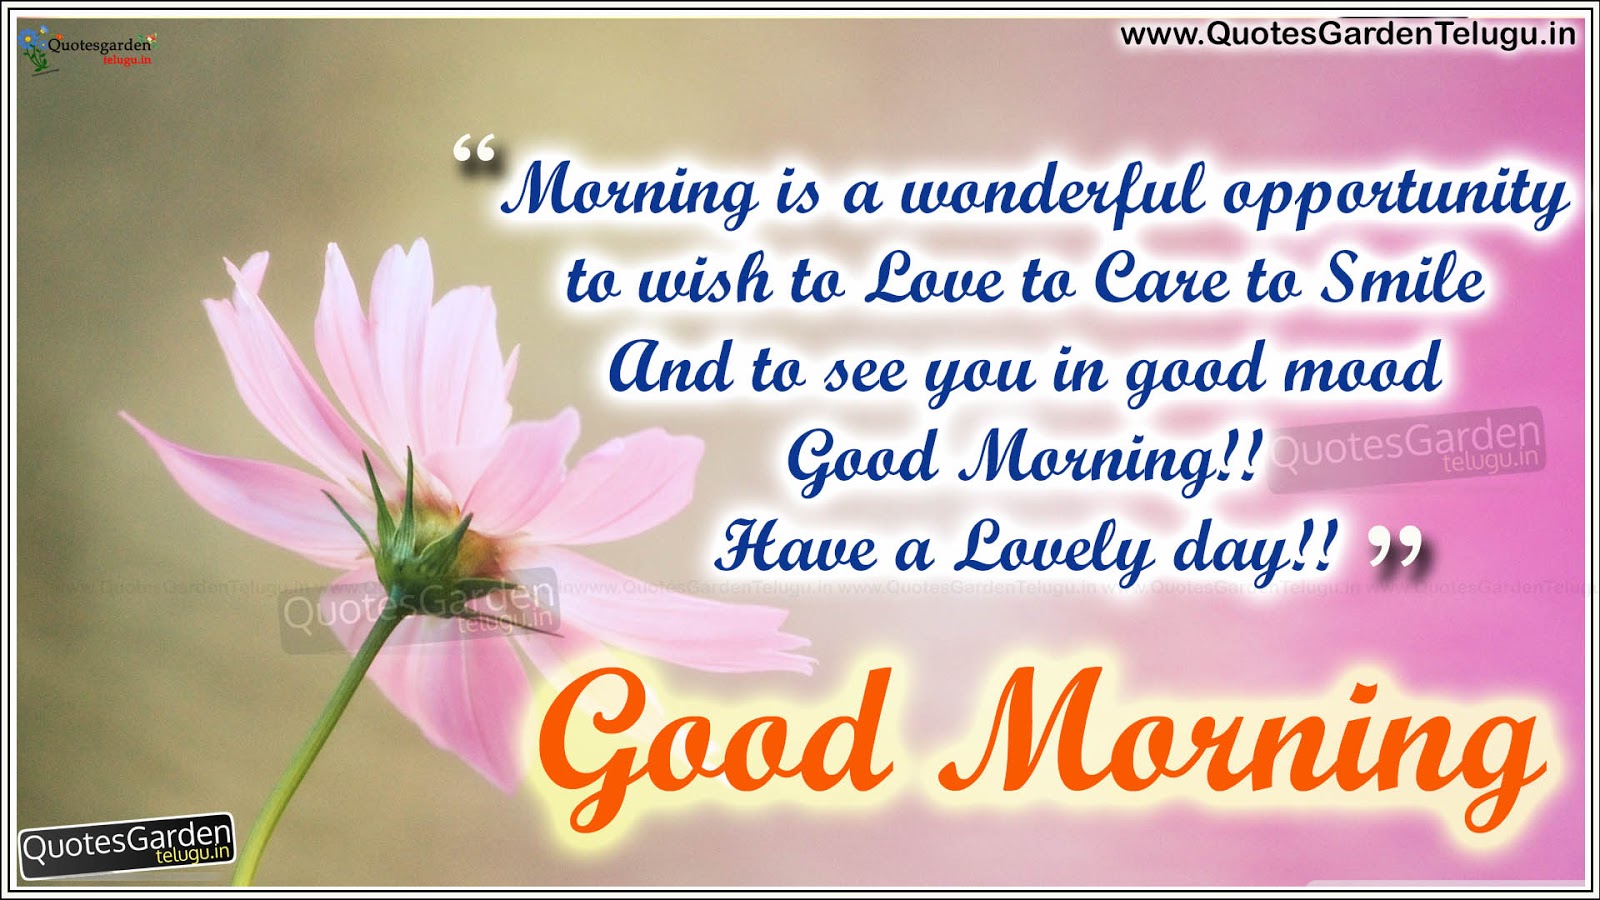 Feel Good Good morning status messages quotes | QUOTES GARDEN TELUGU ...